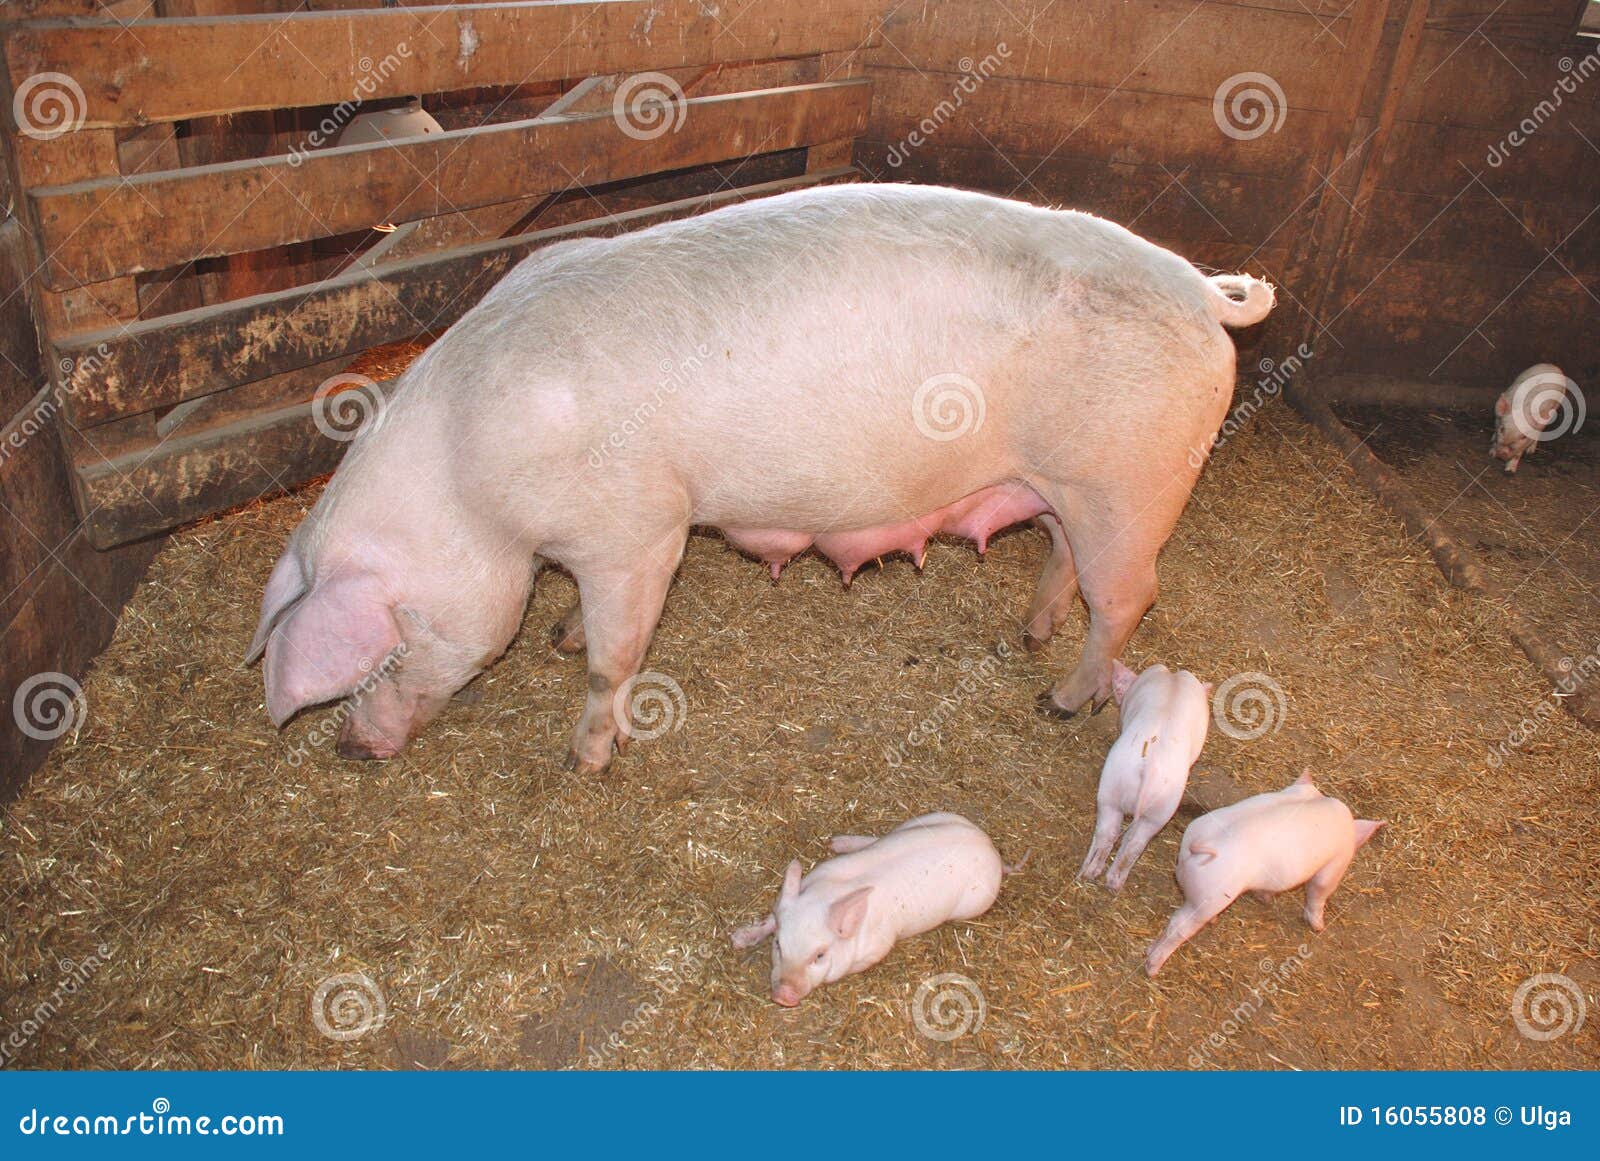 mother pig clipart - photo #43